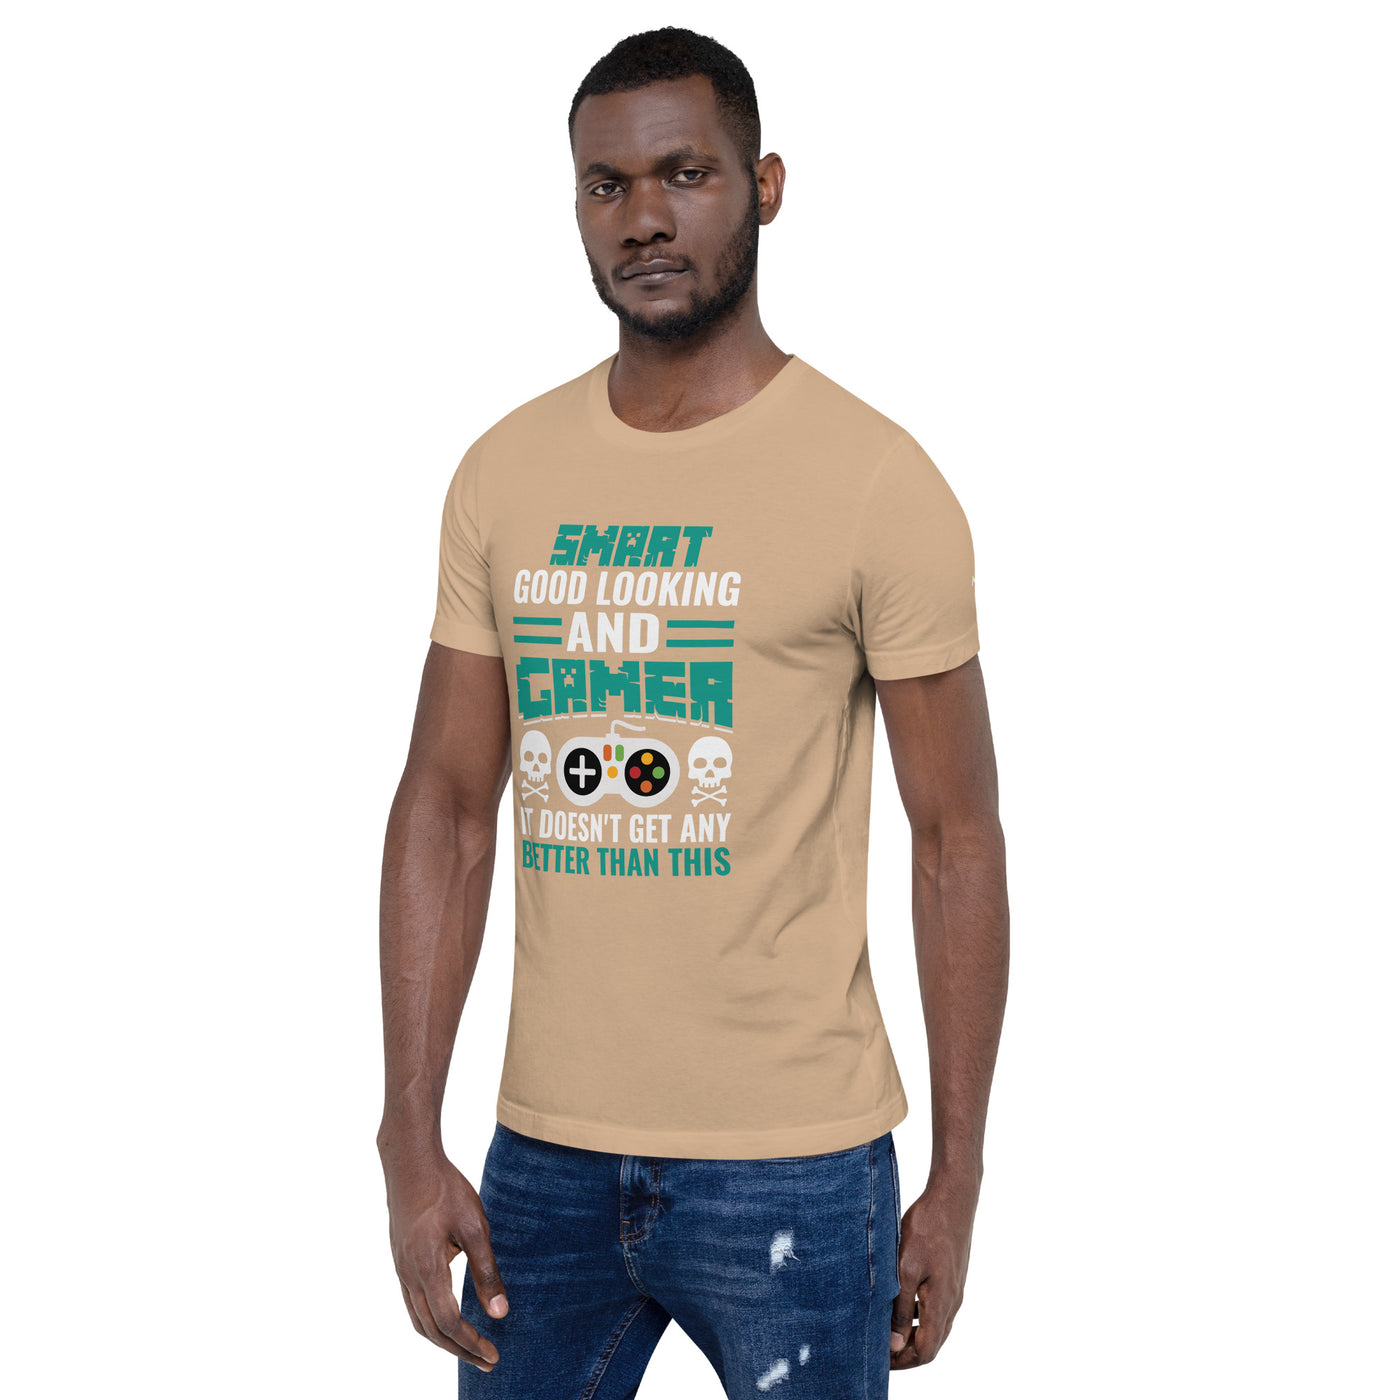 Smart Good Looking and Gamer; It Doesn't Get Any Better than this - Unisex t-shirt